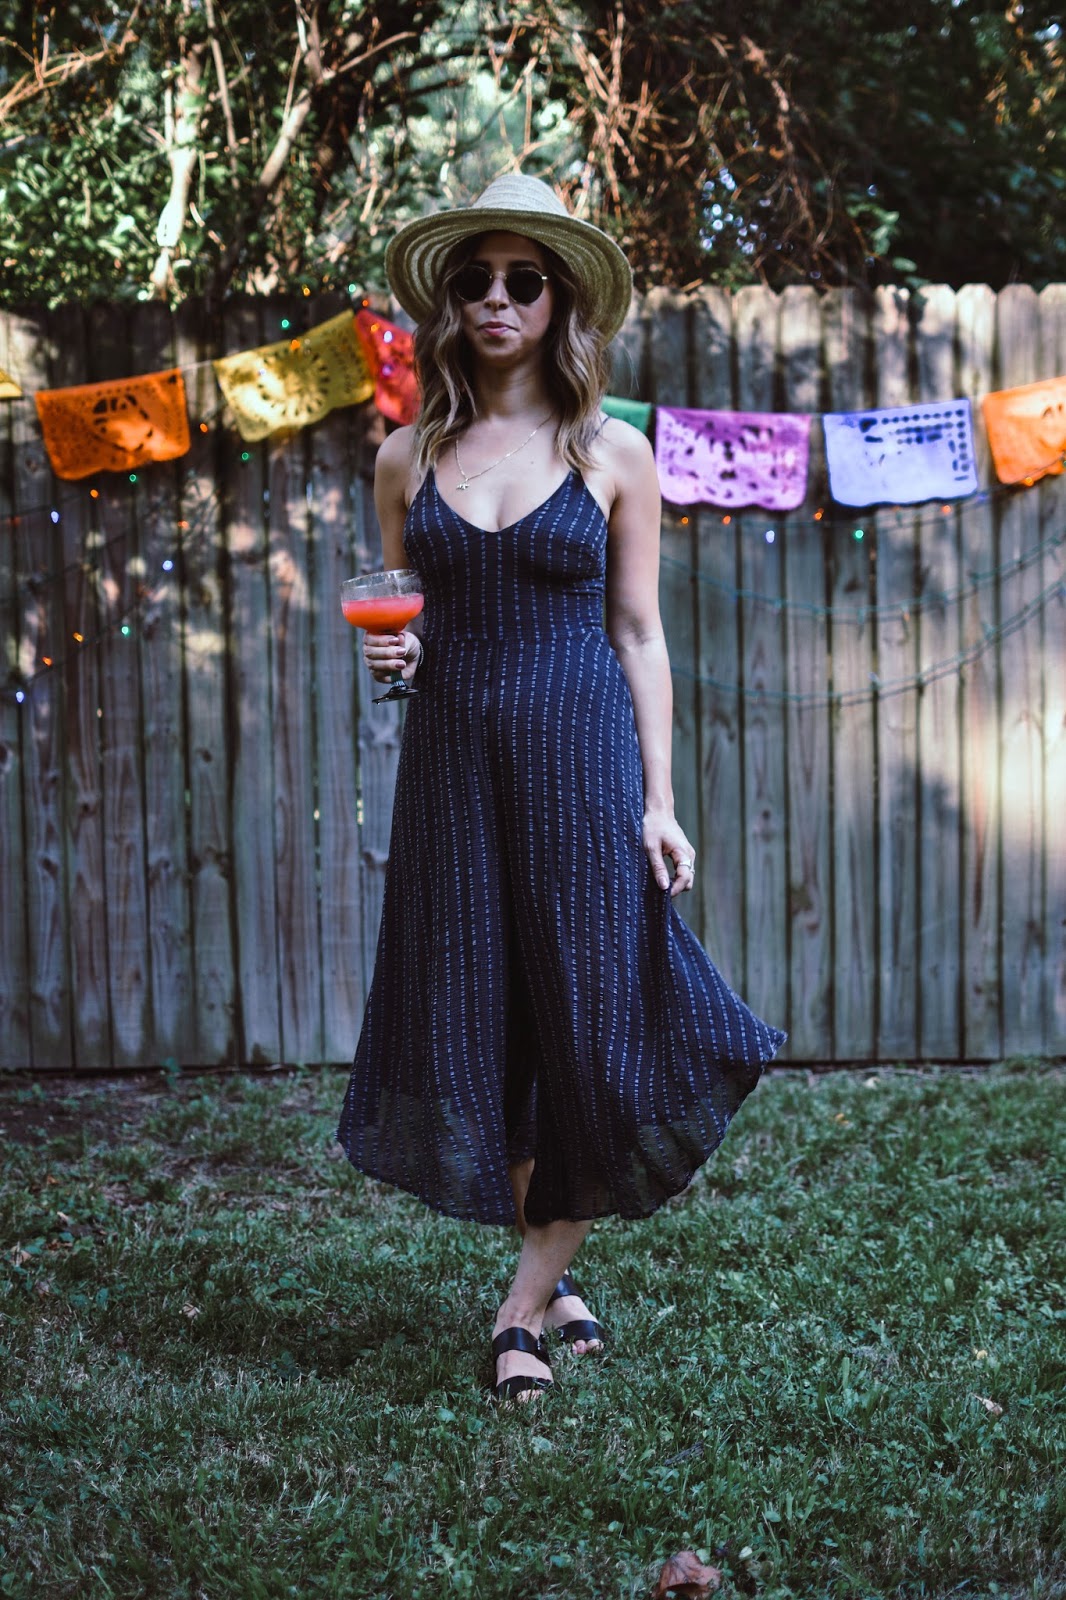 culotte-jumpsuit-summer-style-anthropologie-style-ootd-blogger